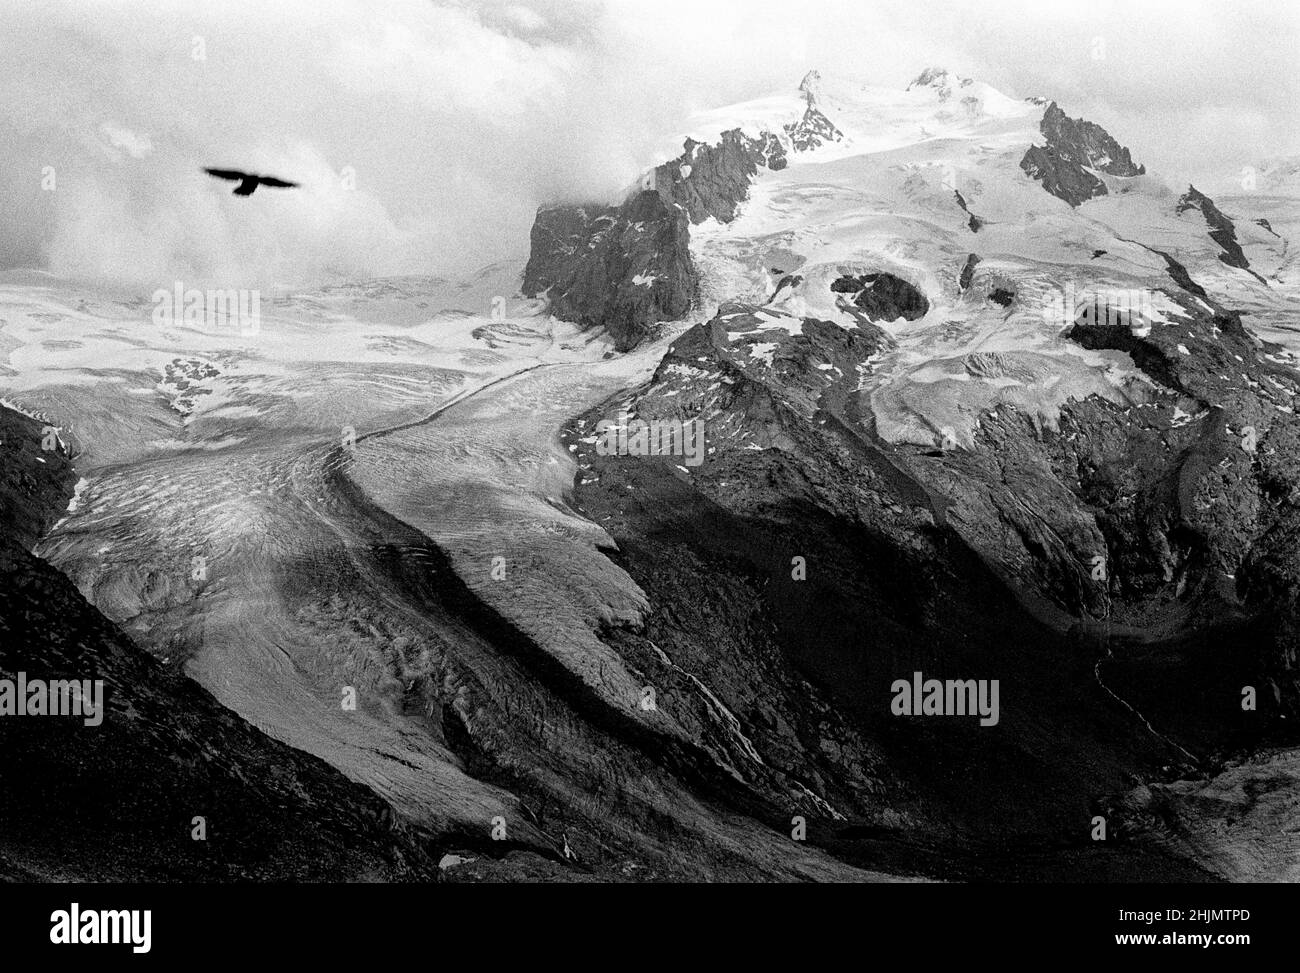 Black and white photograph of an eagle flying over Gornergletscher glacier and the mountain Monte Rosa, Zermatt, Swiss Alps, Switzerland, Europe, 2009. Stock Photo